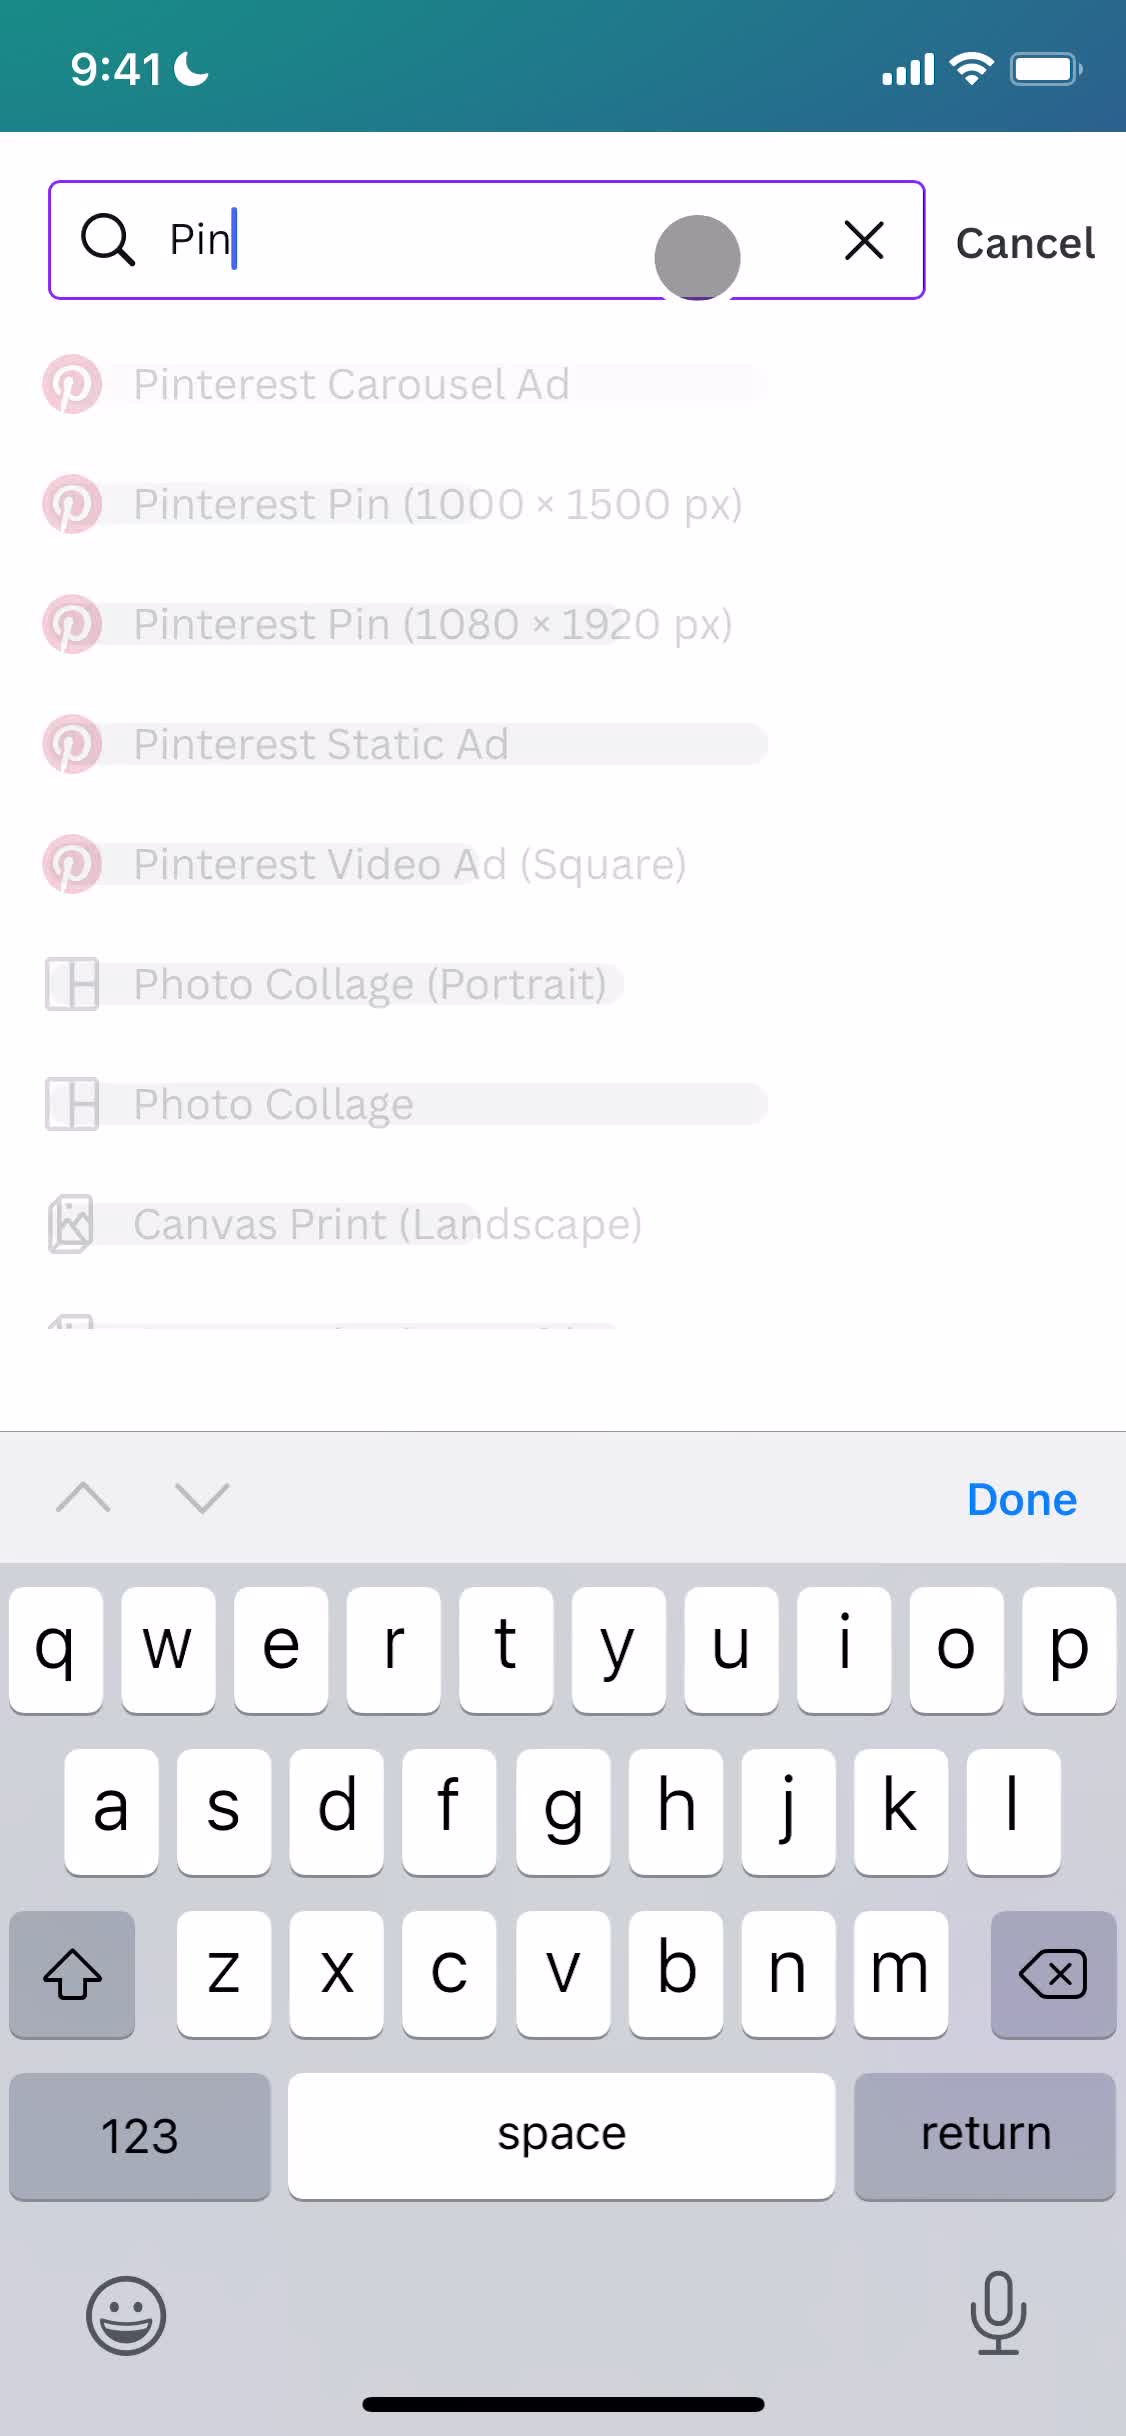 Screenshot of Select size on Creating a design on Canva user flow